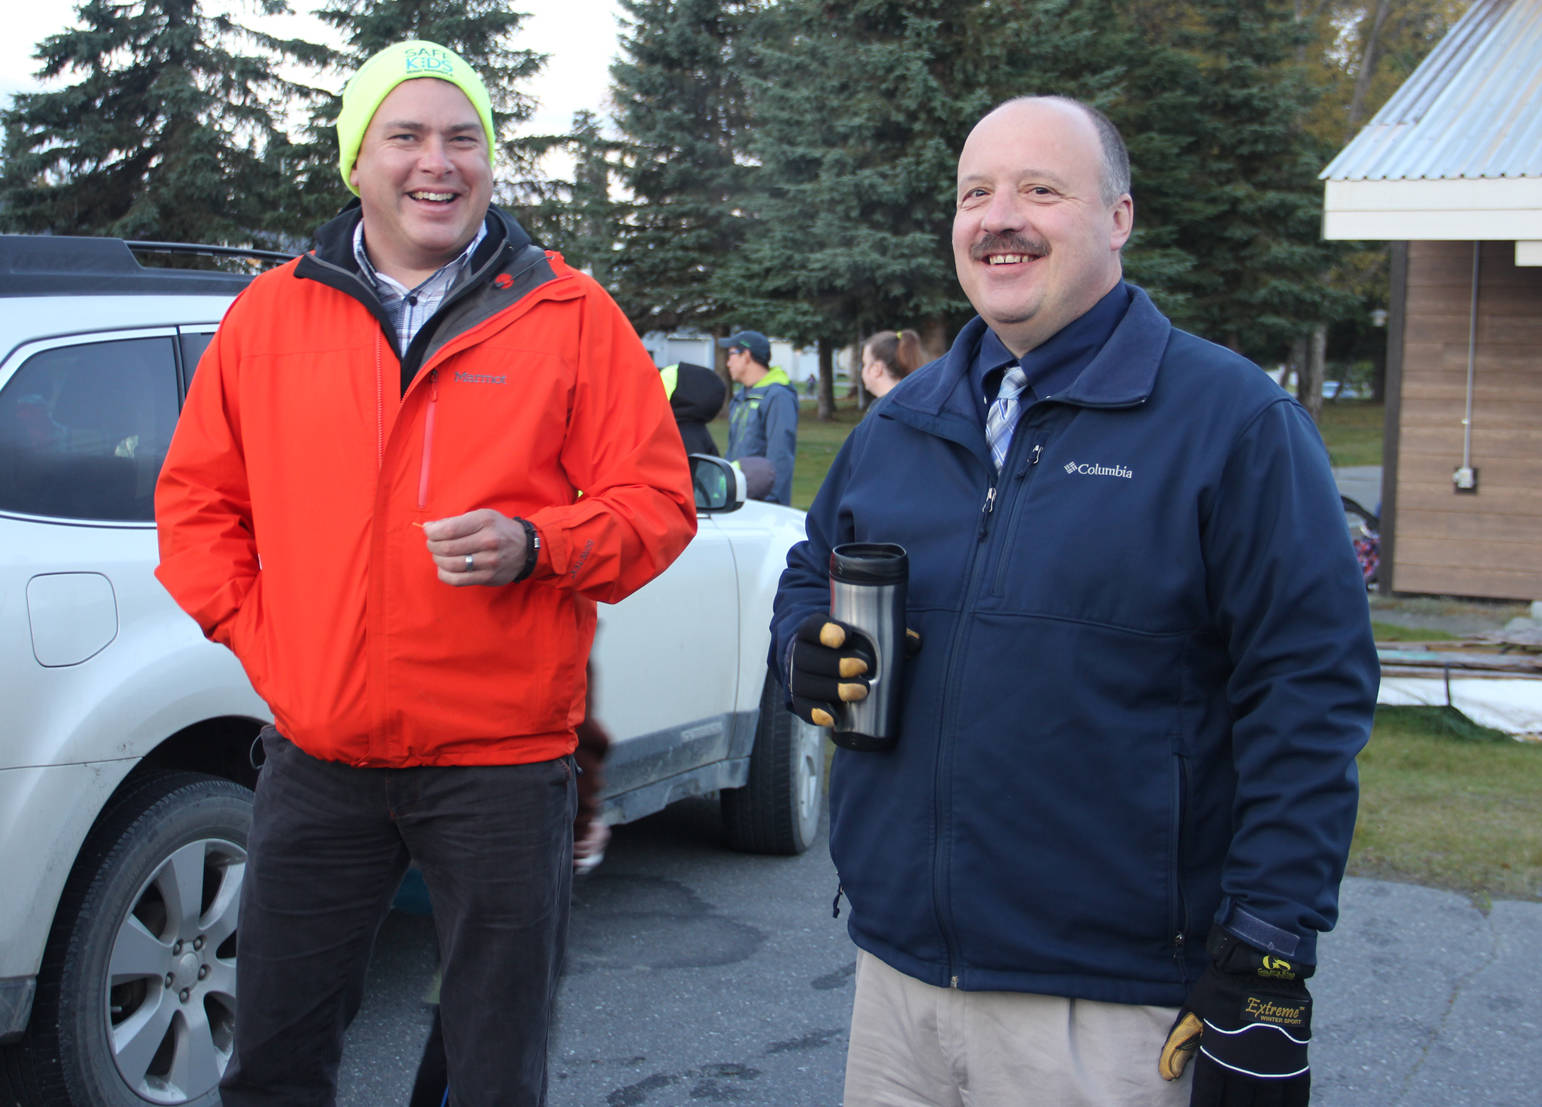 KPBSD Superintendent Sean Dusek and Redoubt Elementary Principal Bill Withrow join kids walking to school.